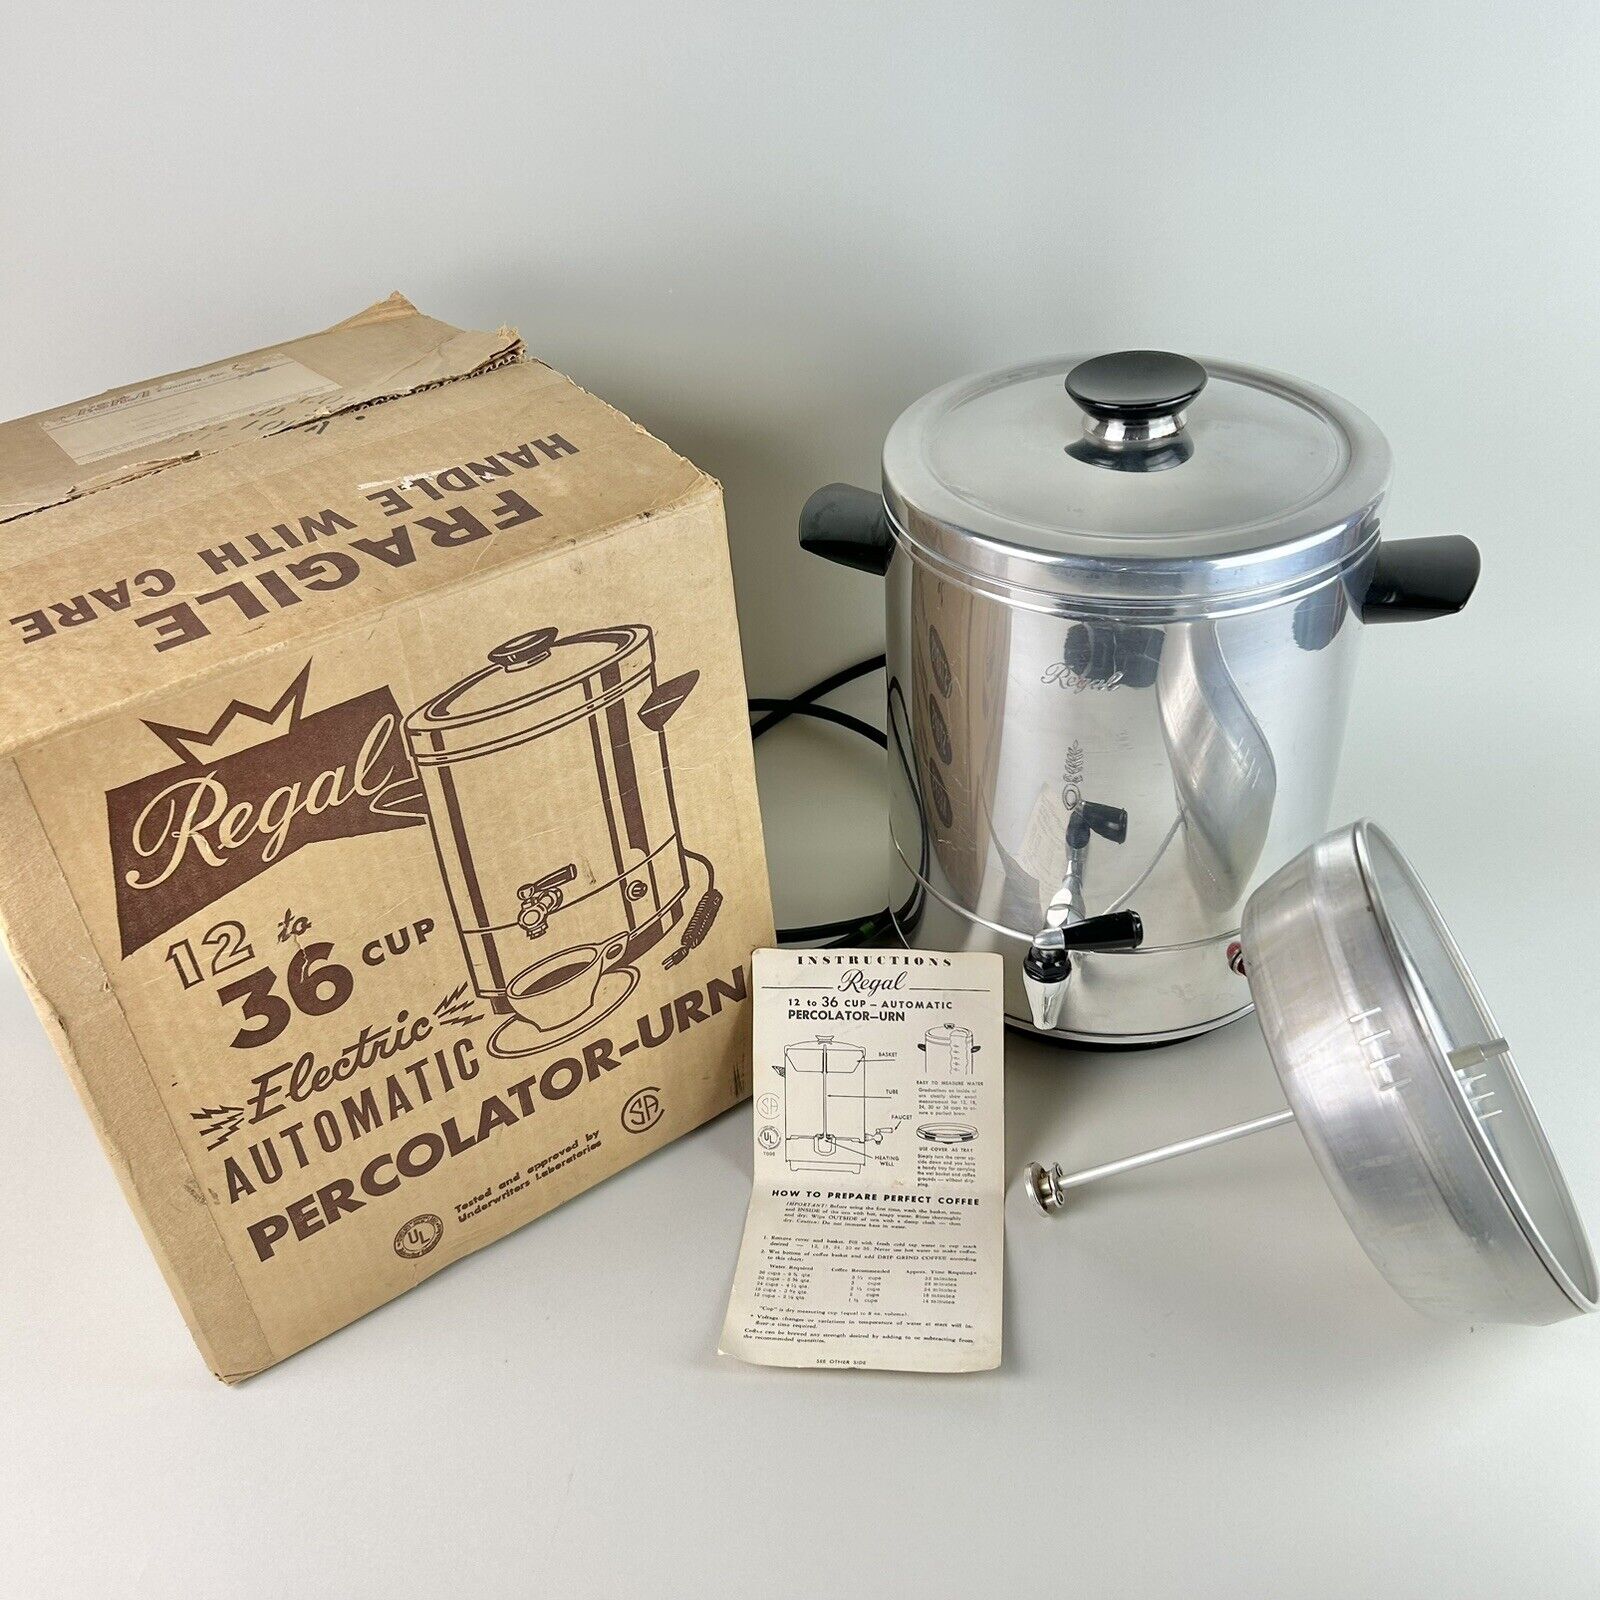 VTG Regal Automatic Percolator 12- 36 Cup Electric Coffee Maker NO. 7006 Tested